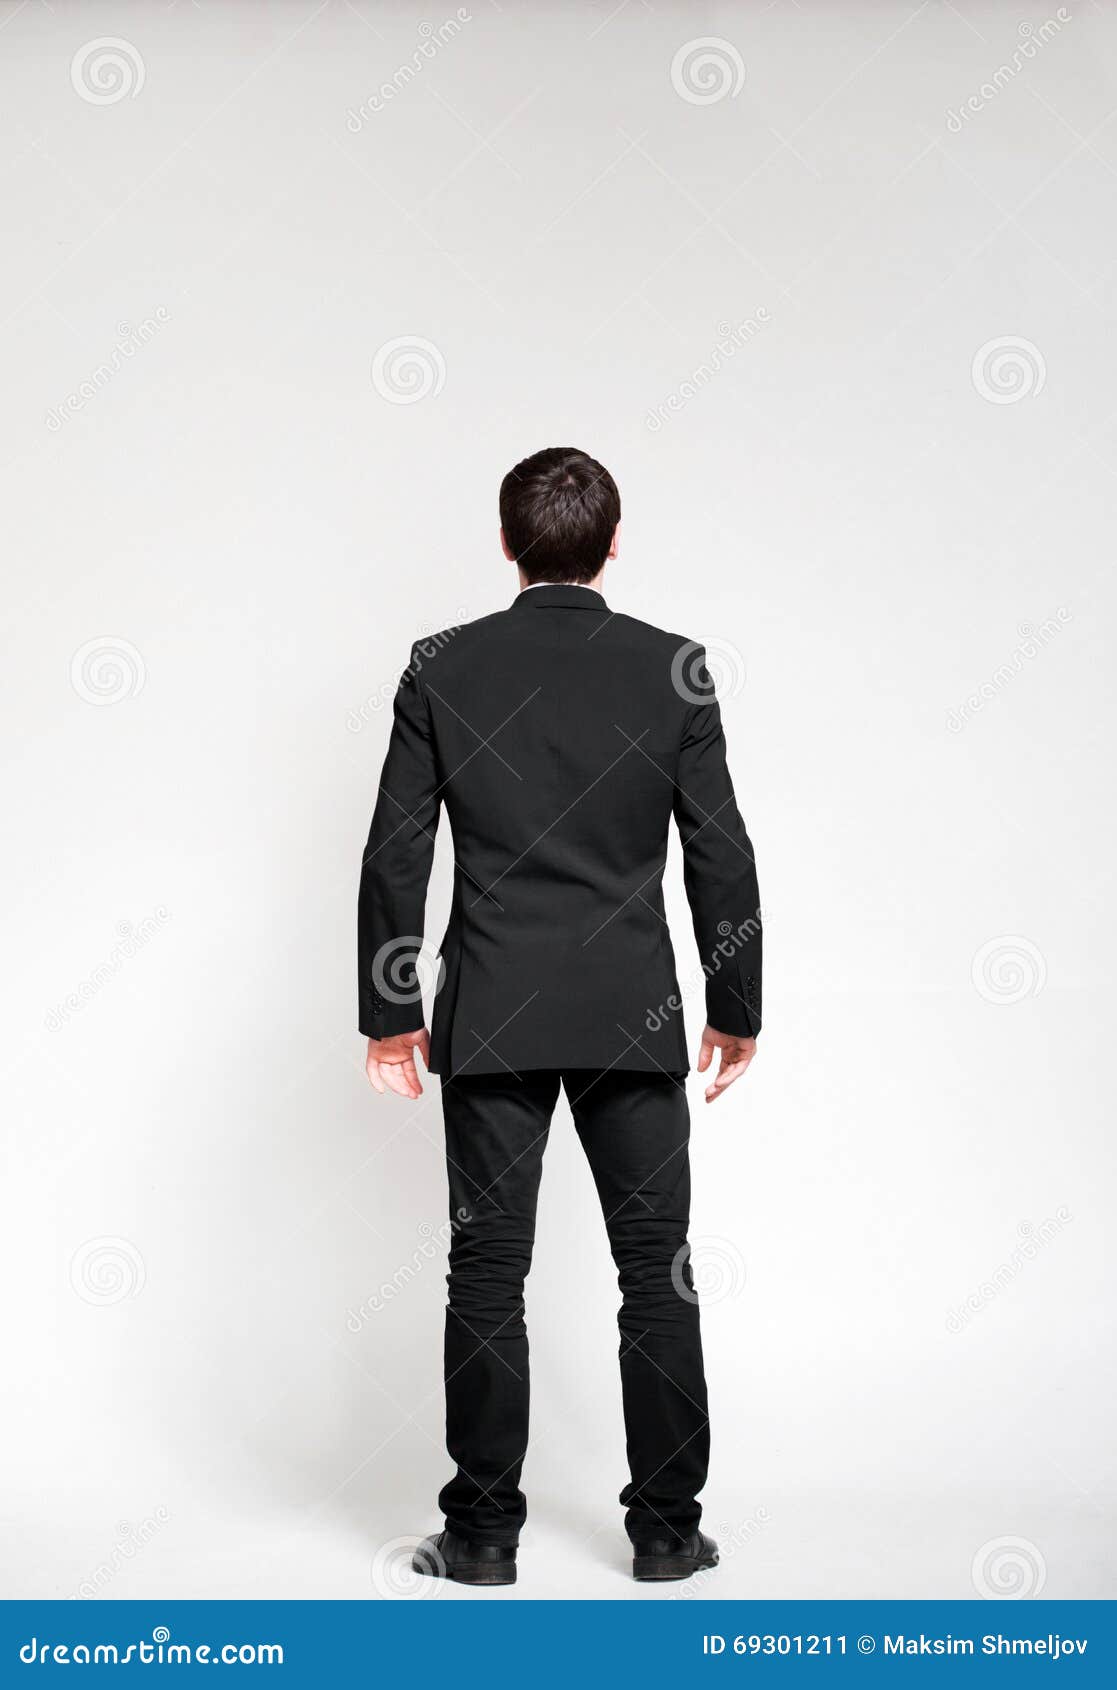 Businessman Looking on Empty Wall Stock Image - Image of clerk, looking ...